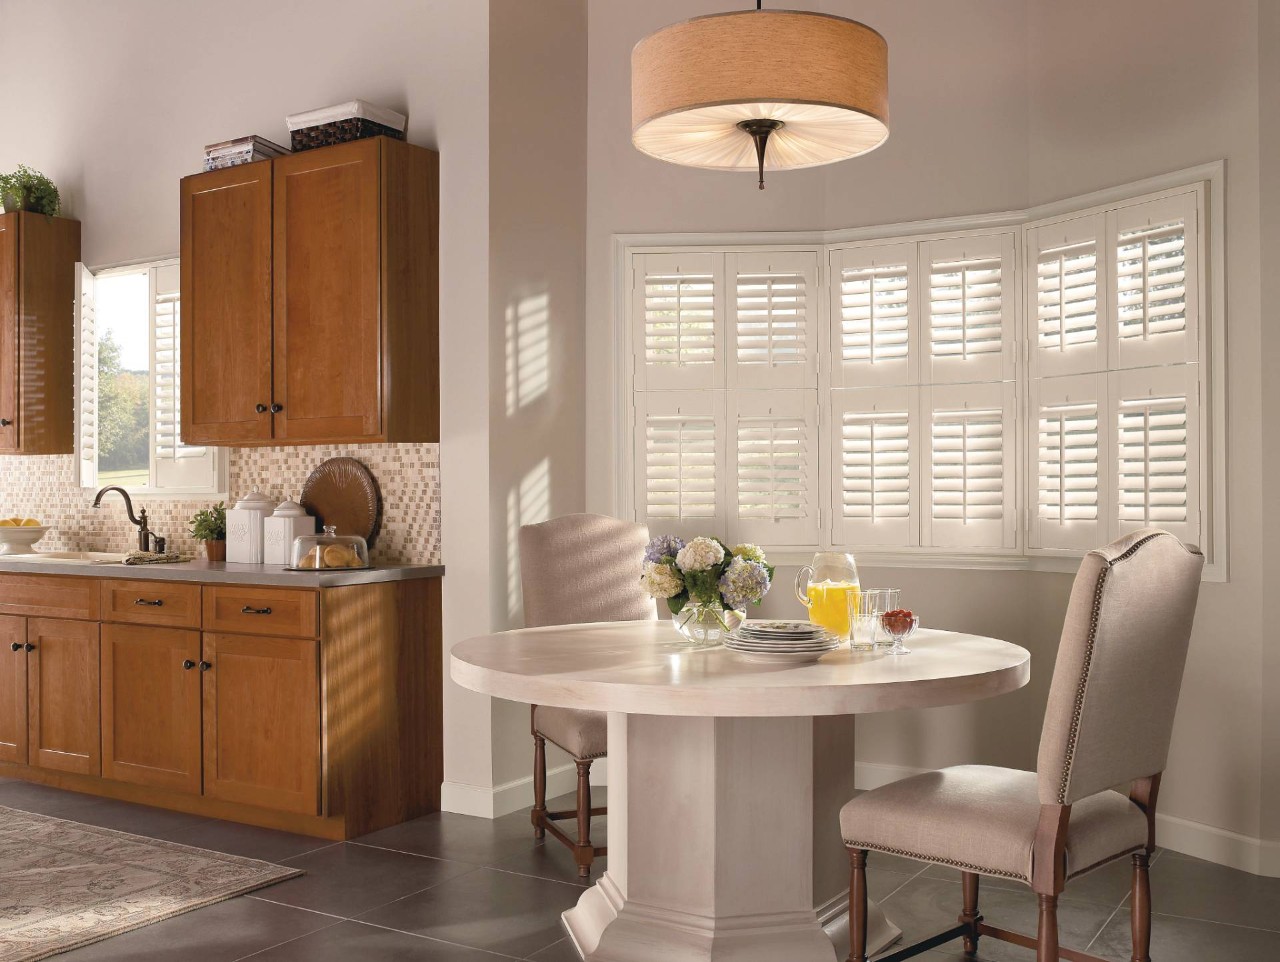 Hunter Douglas shutters in a traditional kitchen near Marriottsville, MD, during the day